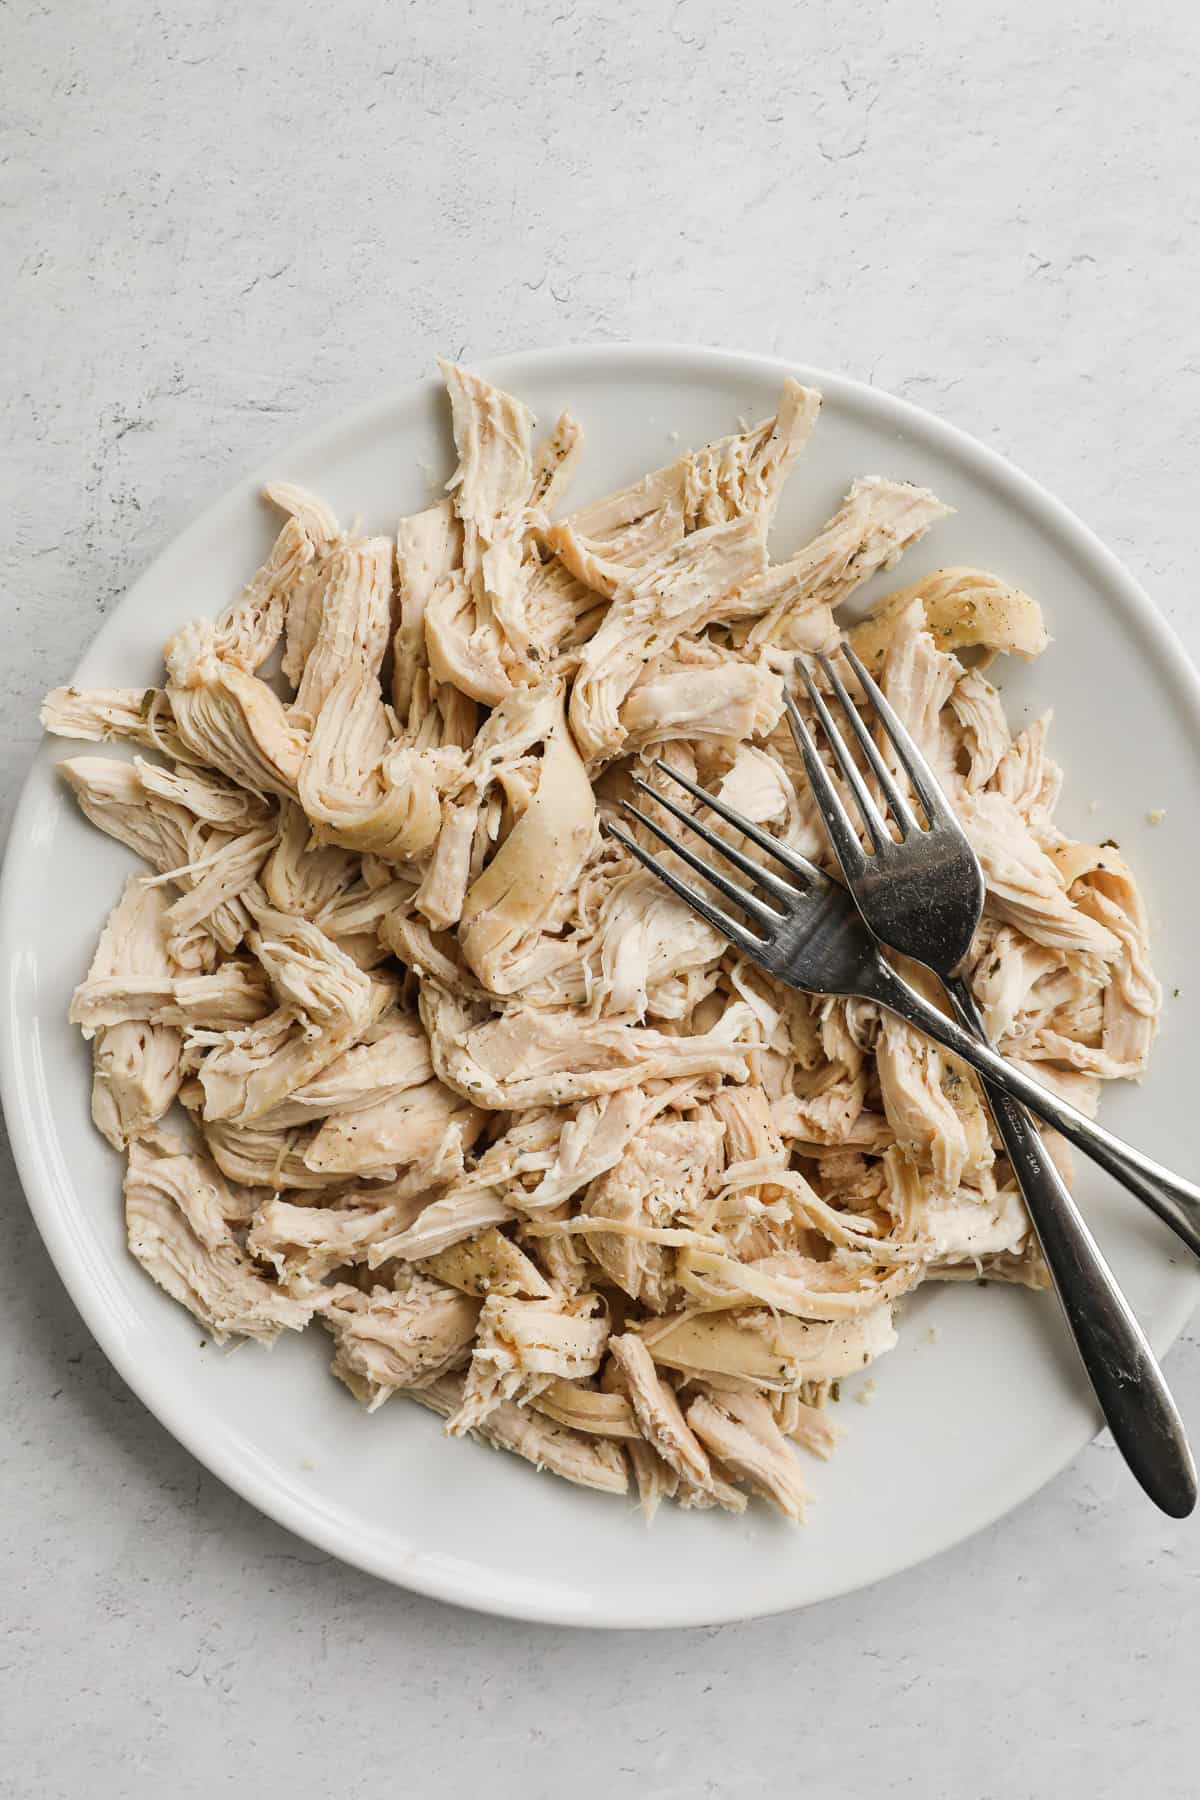 shredded cooked chicken on a plate